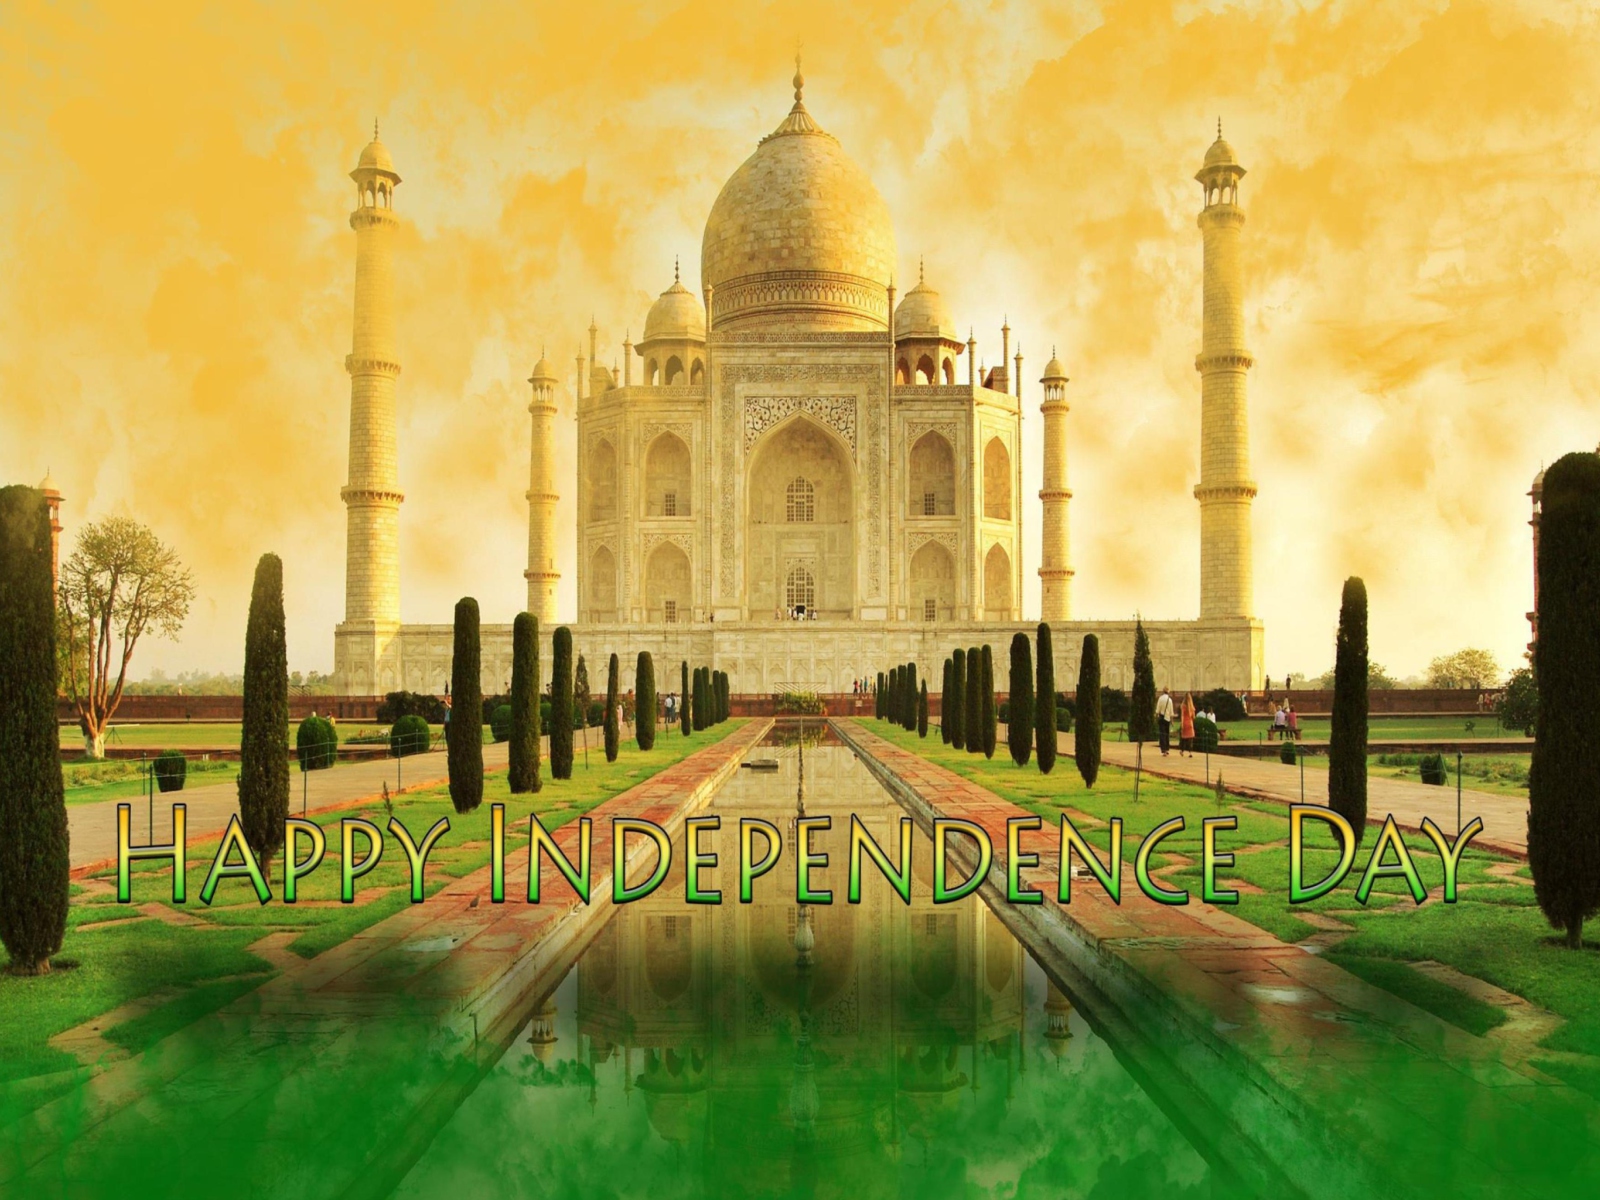 Happy Independence Day in India wallpaper 1600x1200